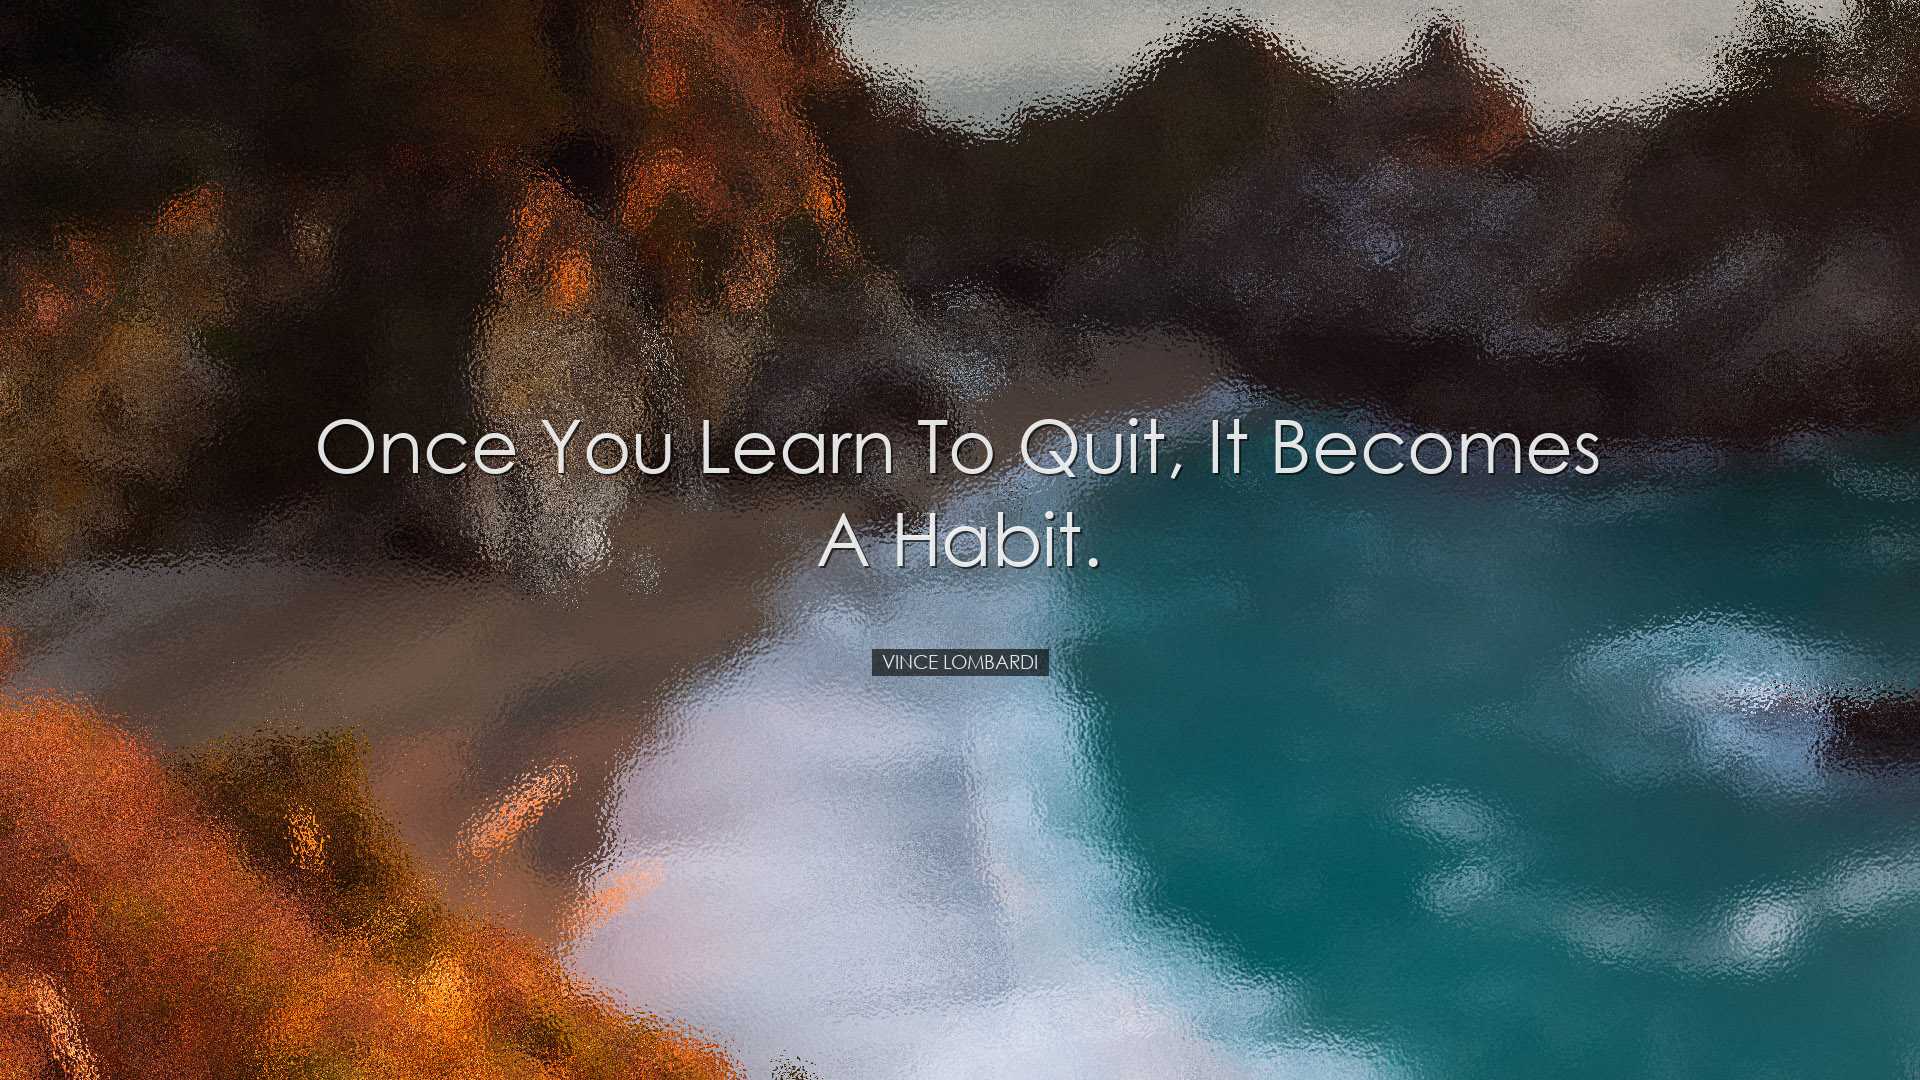 Once you learn to quit, it becomes a habit. - Vince Lombardi